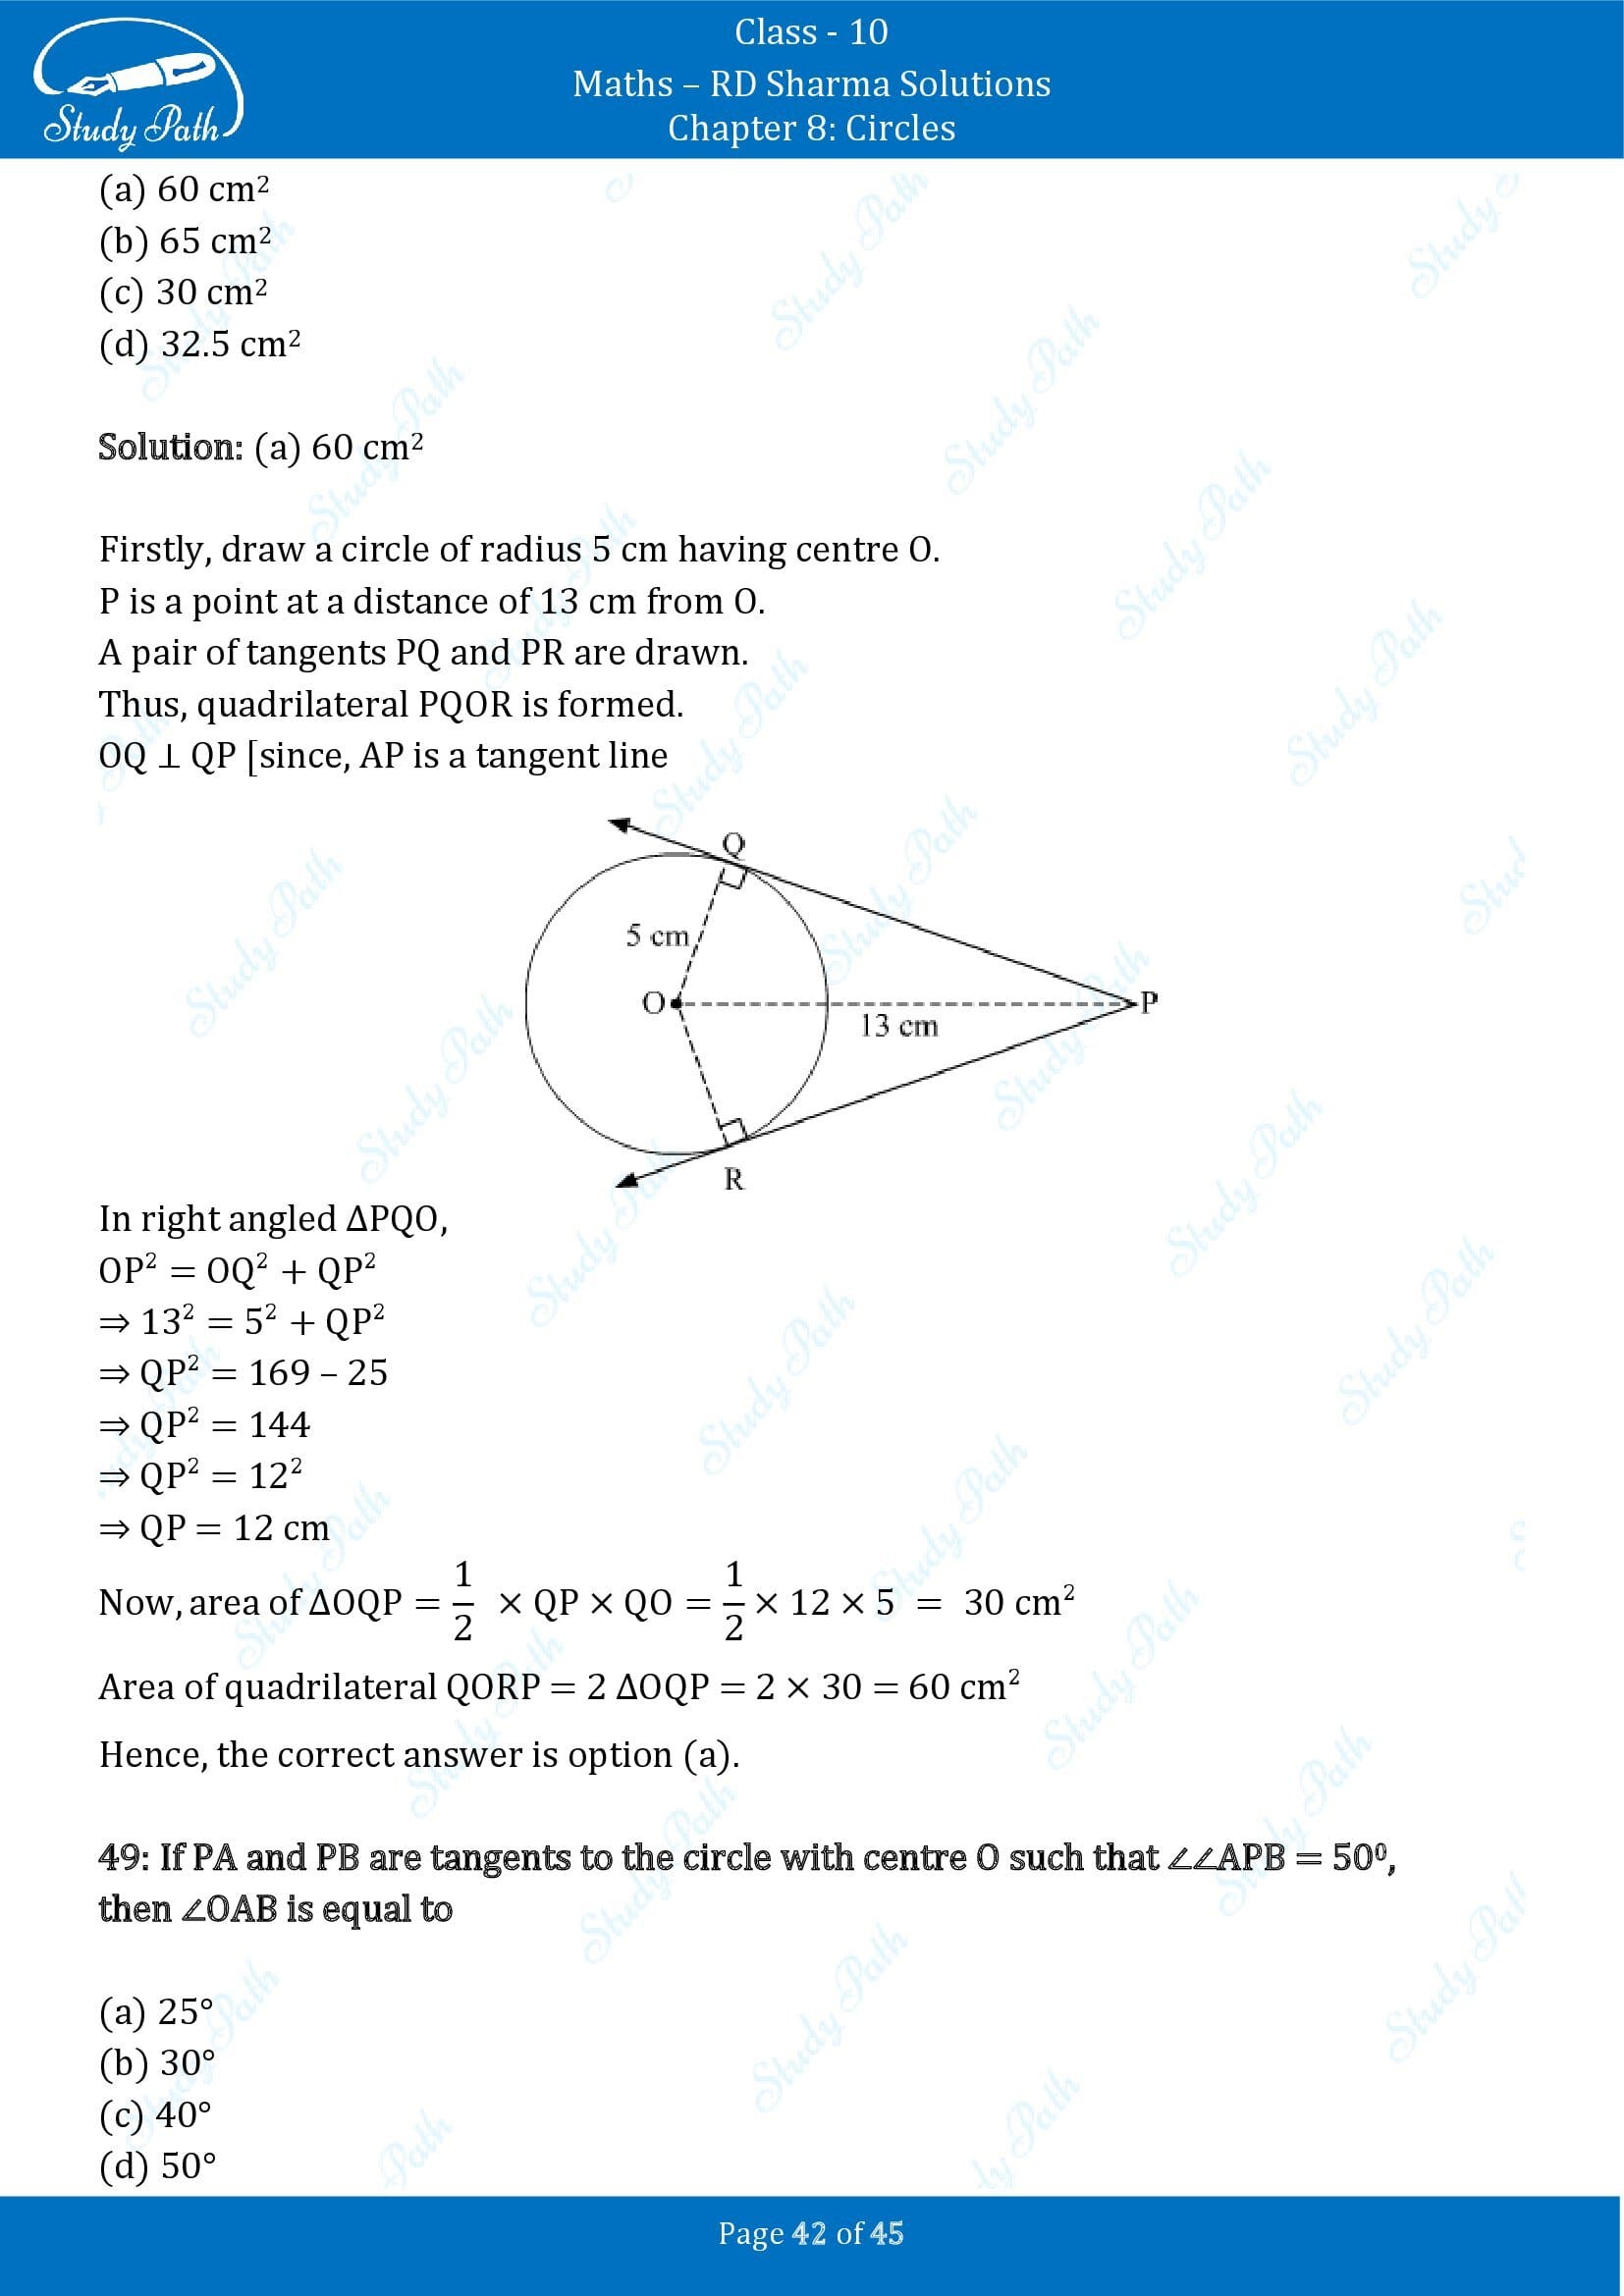 RD Sharma Solutions Class 10 Chapter 8 Circles Multiple Choice Questions MCQs 00042